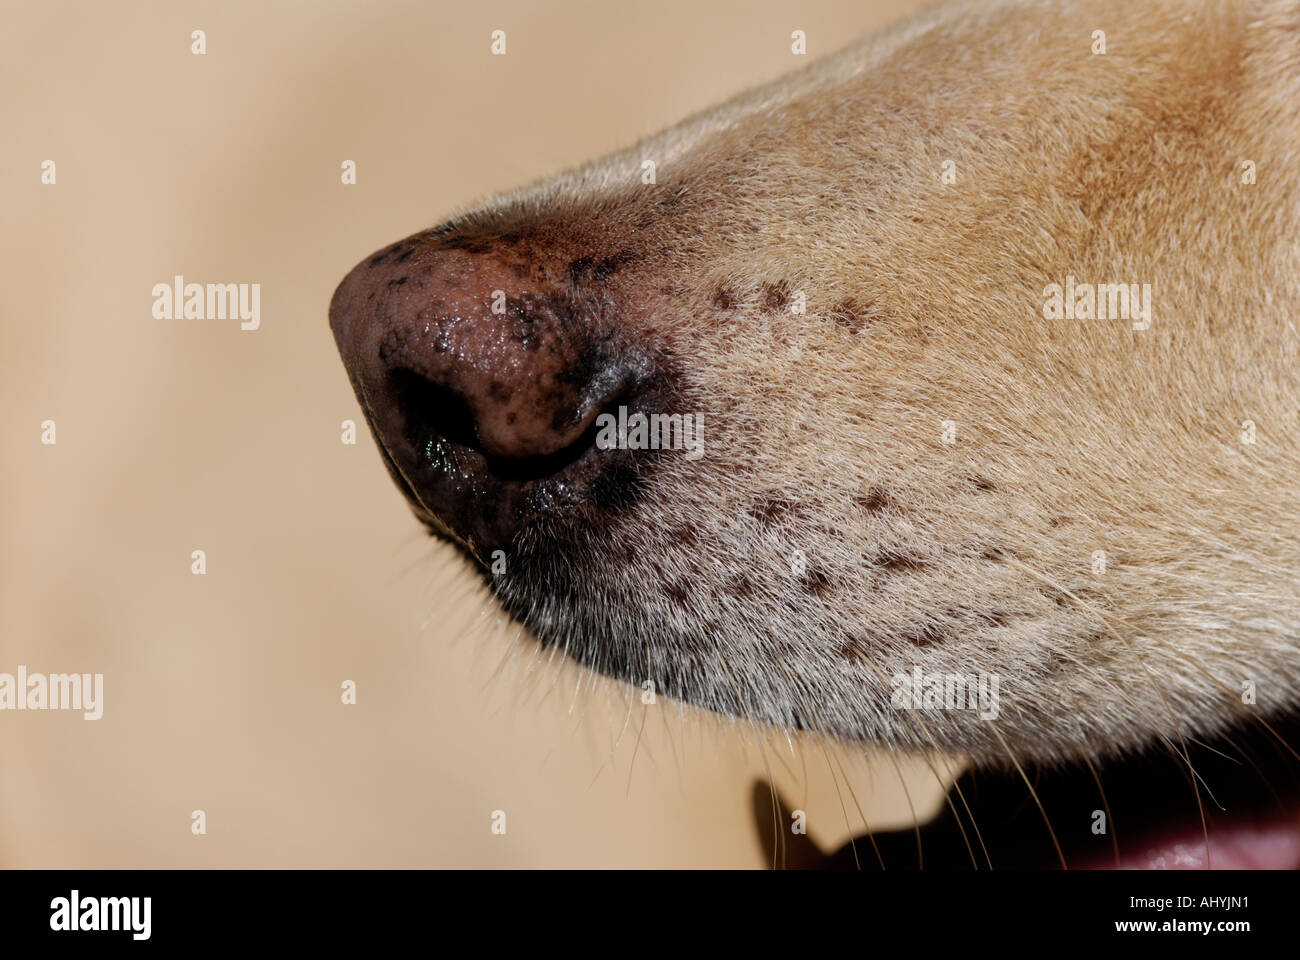 Dog's nose close-up with open mouth panting and canine tooth Stock Photo